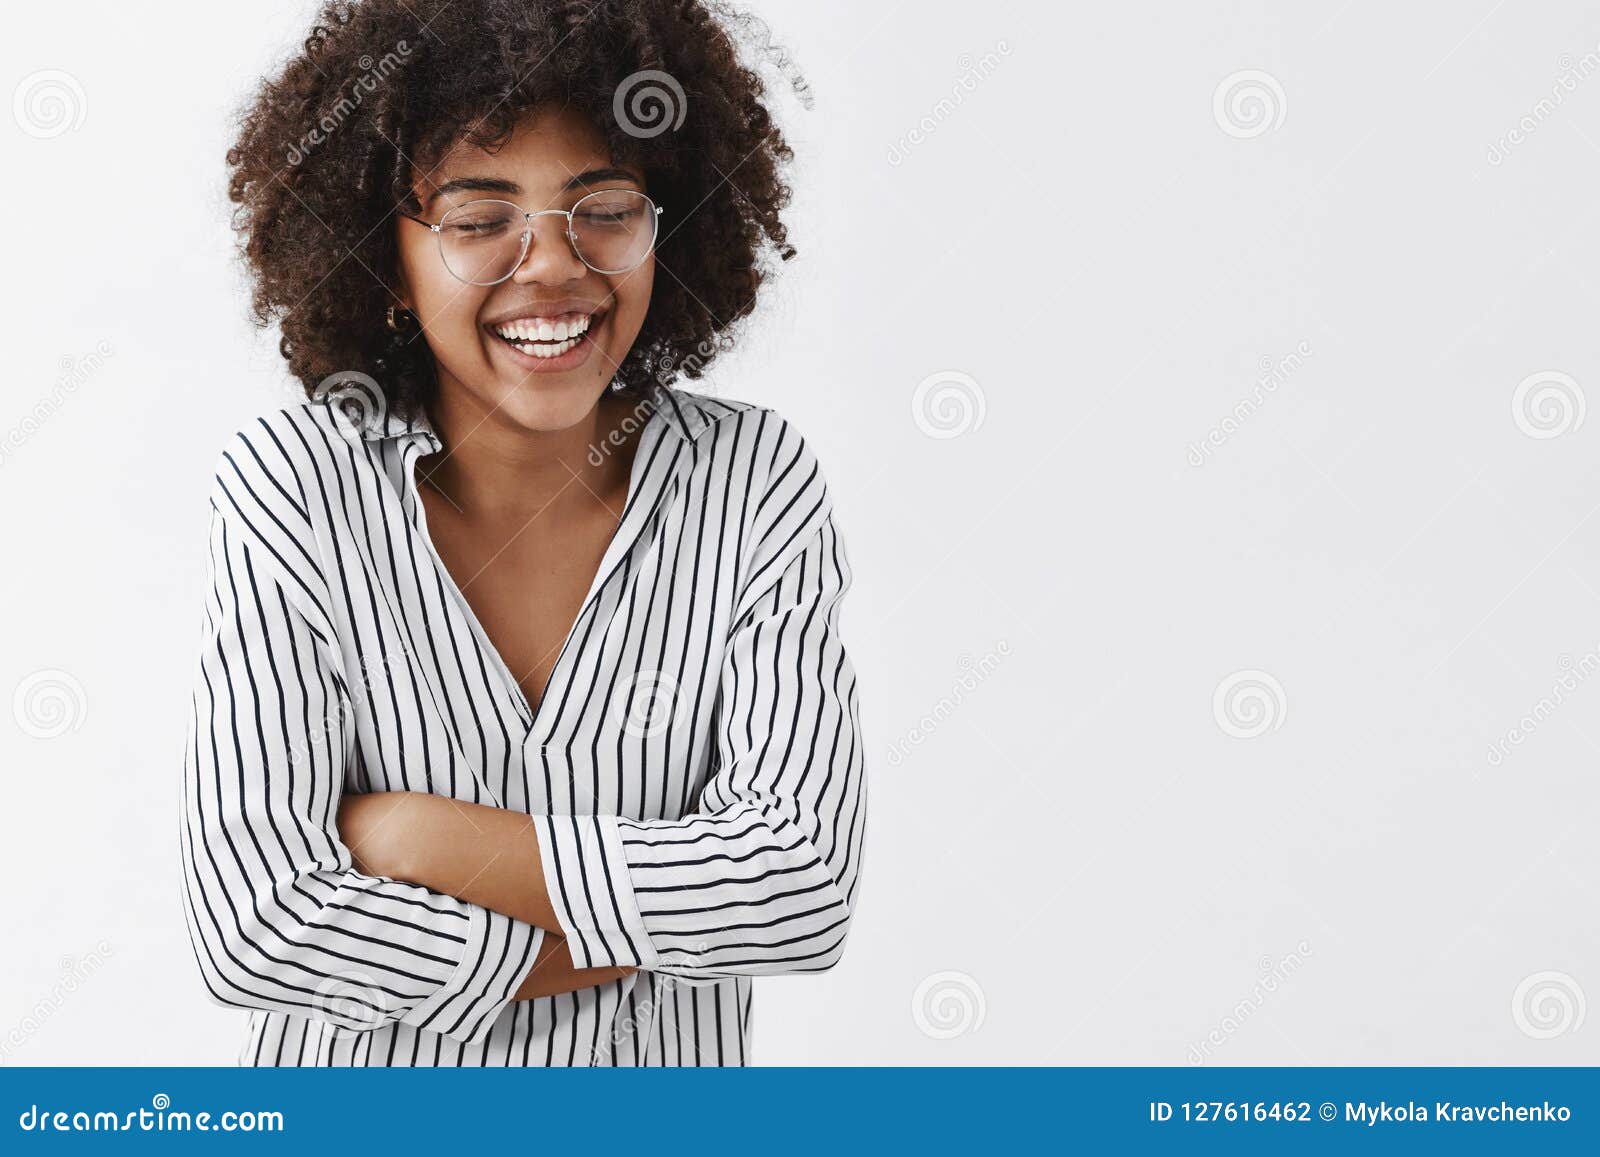 belly aching from laughter. amused and carefree attractive african american woman in striped blouse and glasses closing